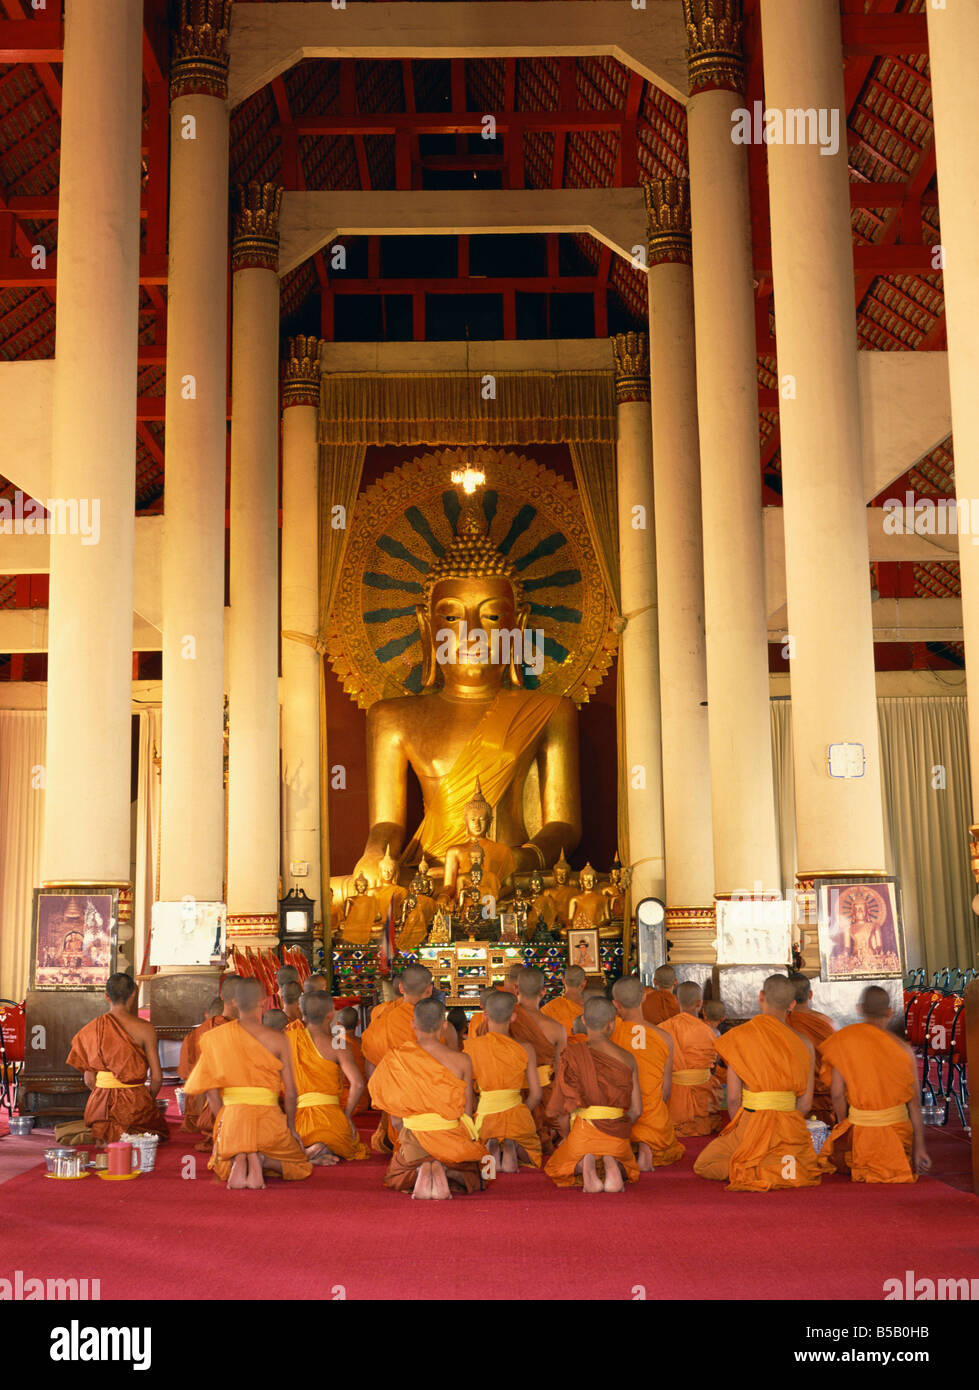 Monks in saffron robes kneel before a statue of the Buddha in Wat Praising in Chiang Mai Thailand Asia C Boonsom Stock Photo